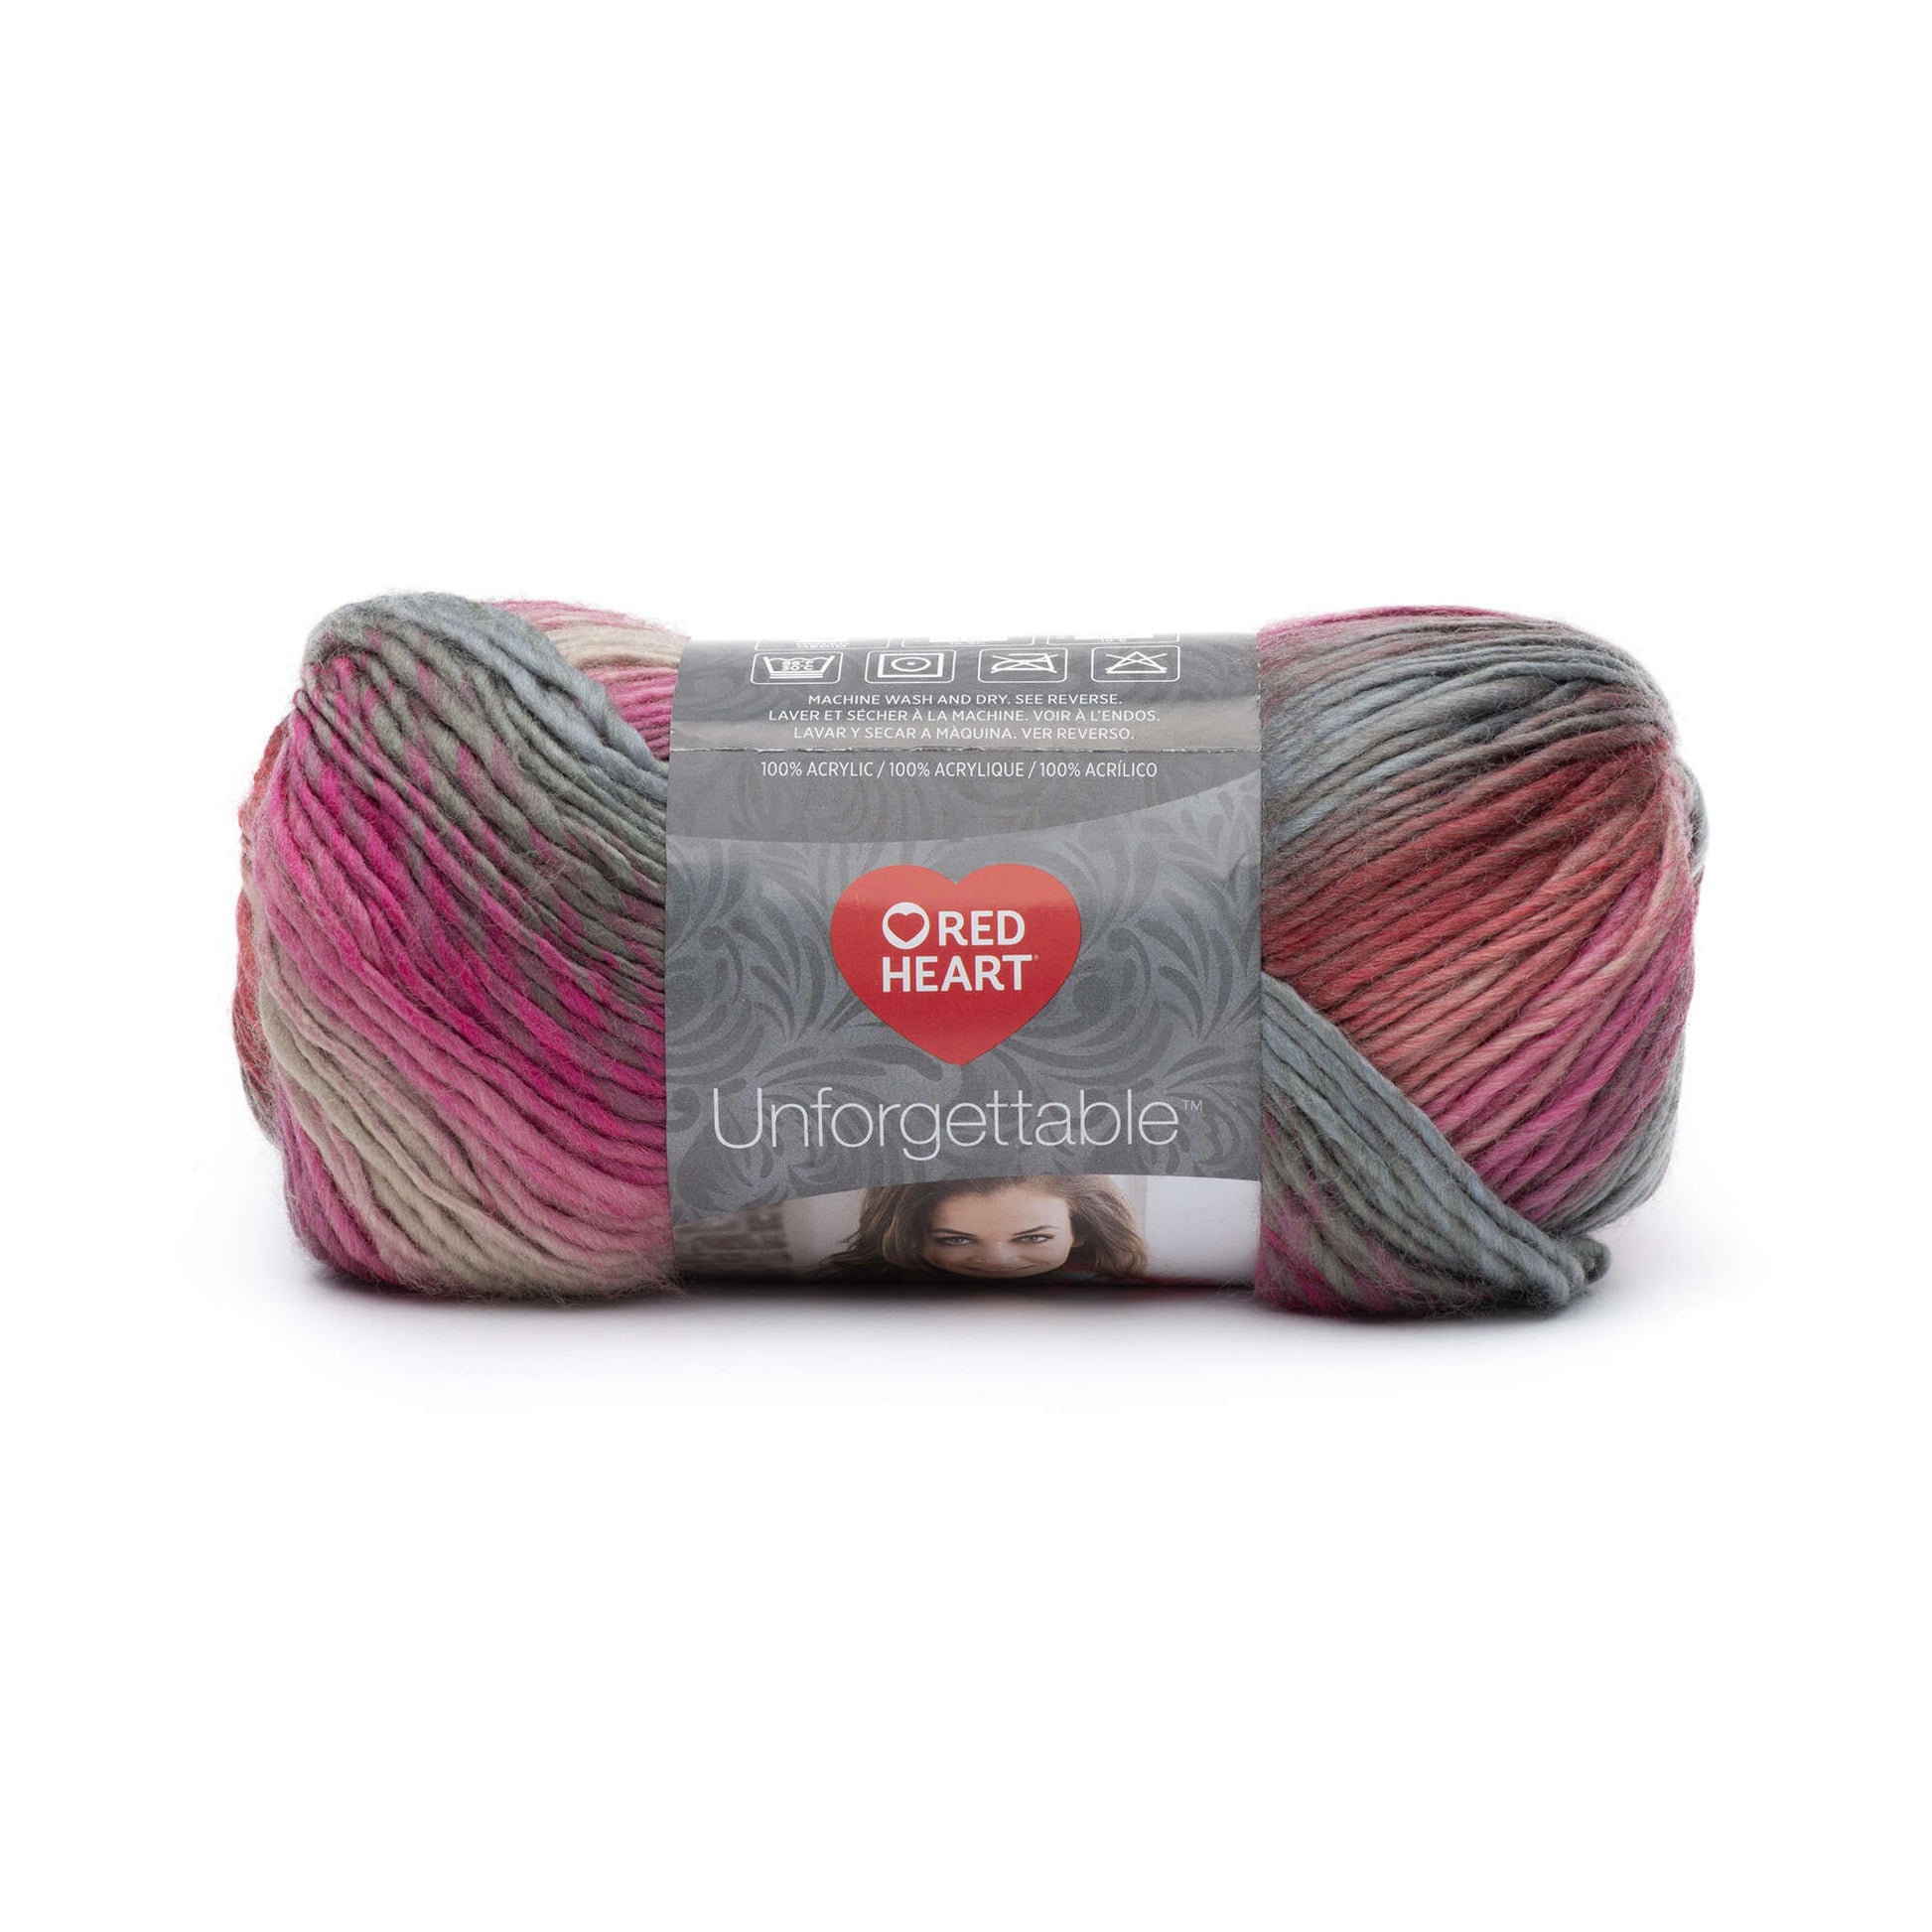 Red Heart Unforgettable Yarn - Clearance Shades* | Yarnspirations